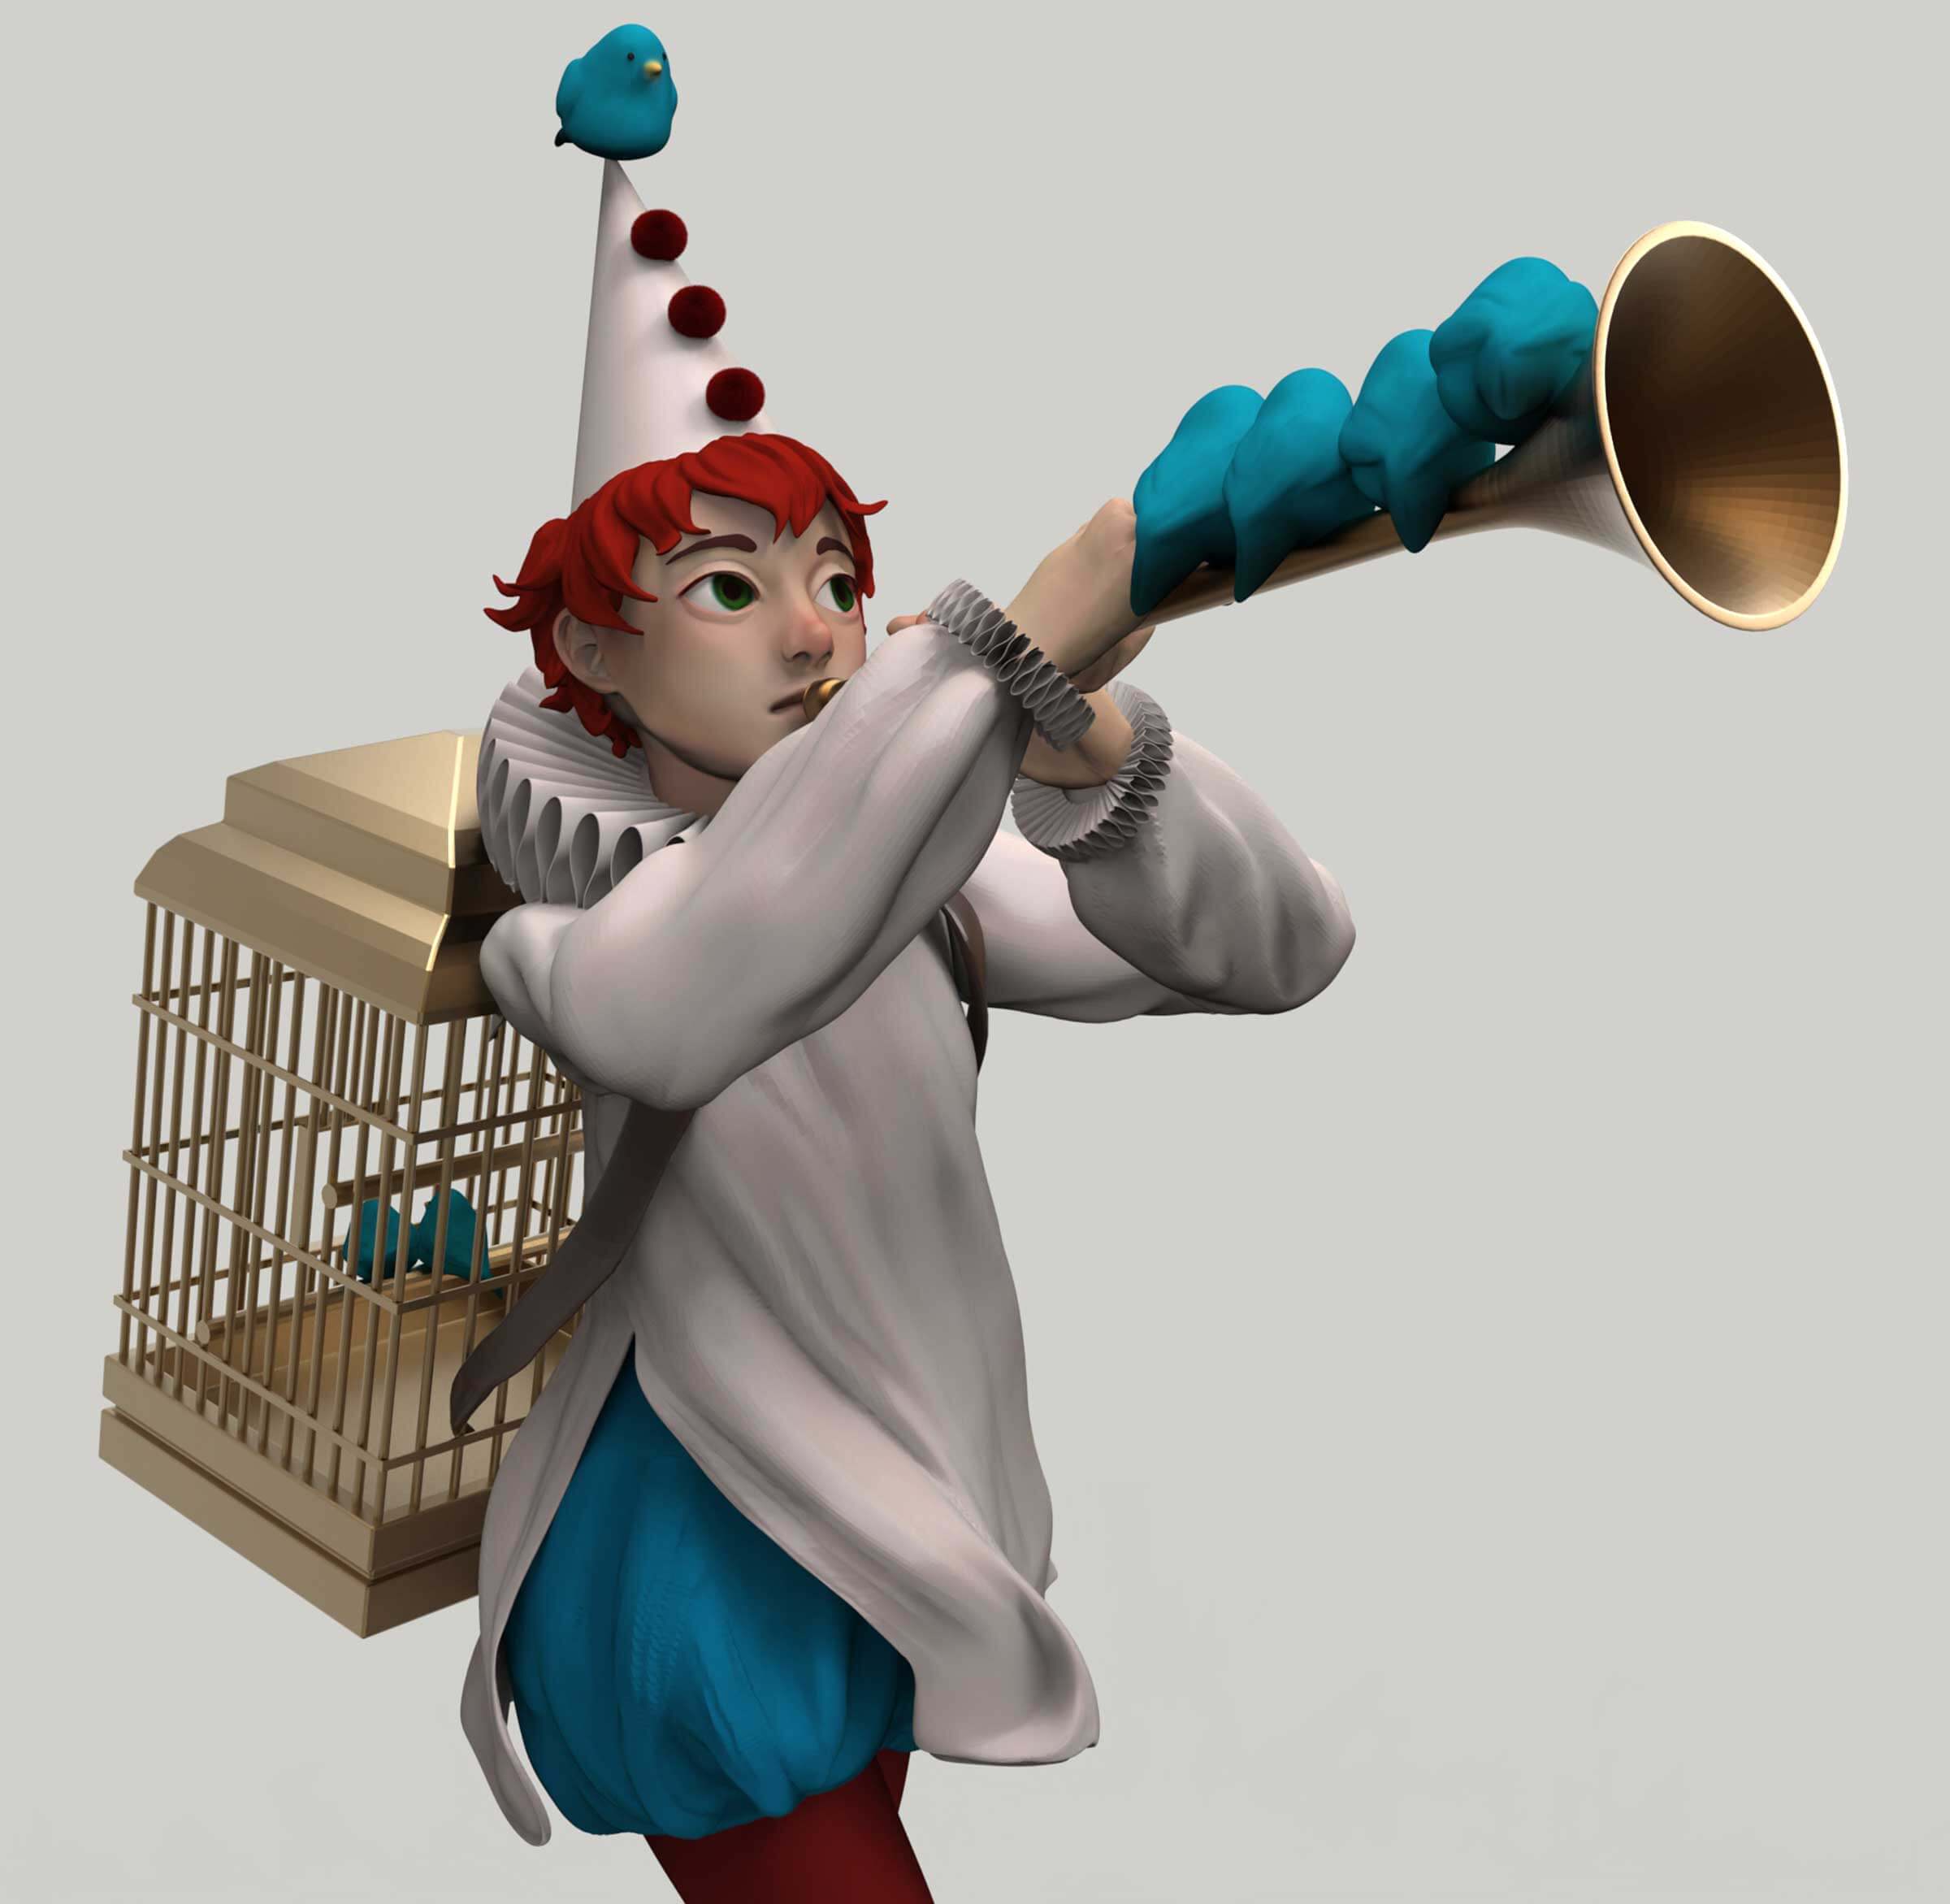 3D model of a jester playing a trumpet lined with blue birds.